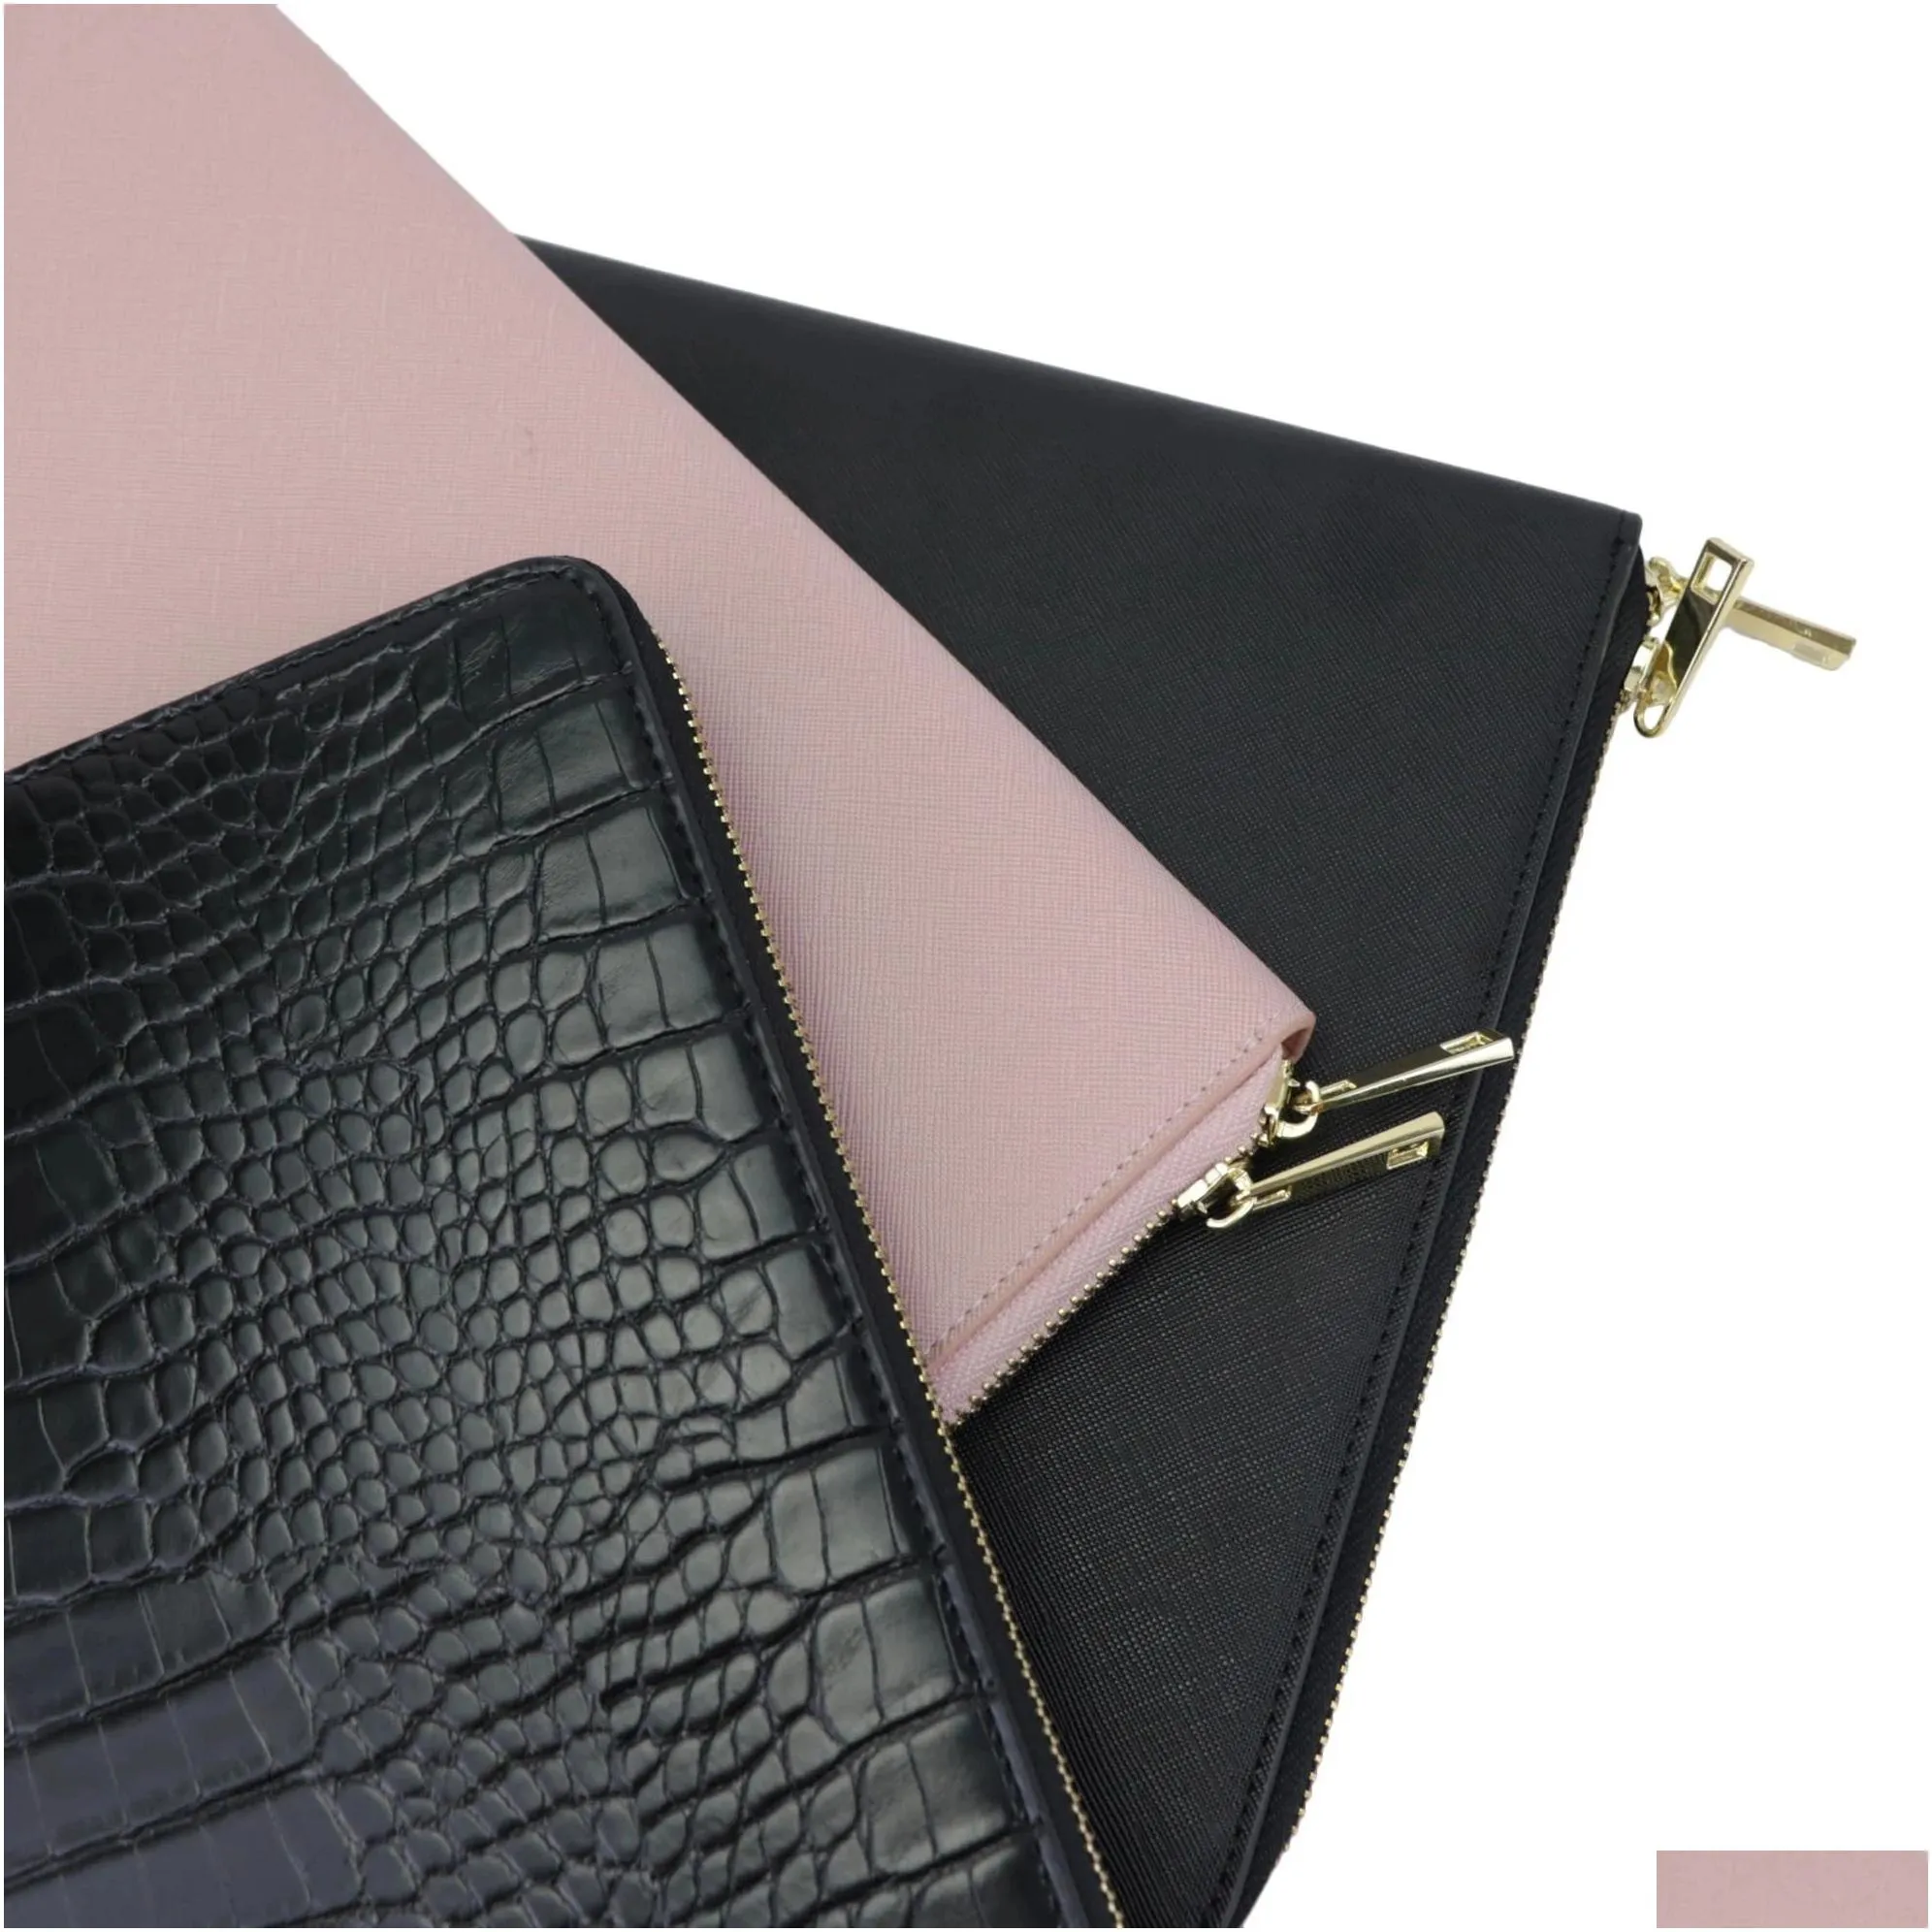 backpack free customized saffiano pu leather laptop bag for macbook 13inch computer sleeve case crocodile pattern briefcase travel